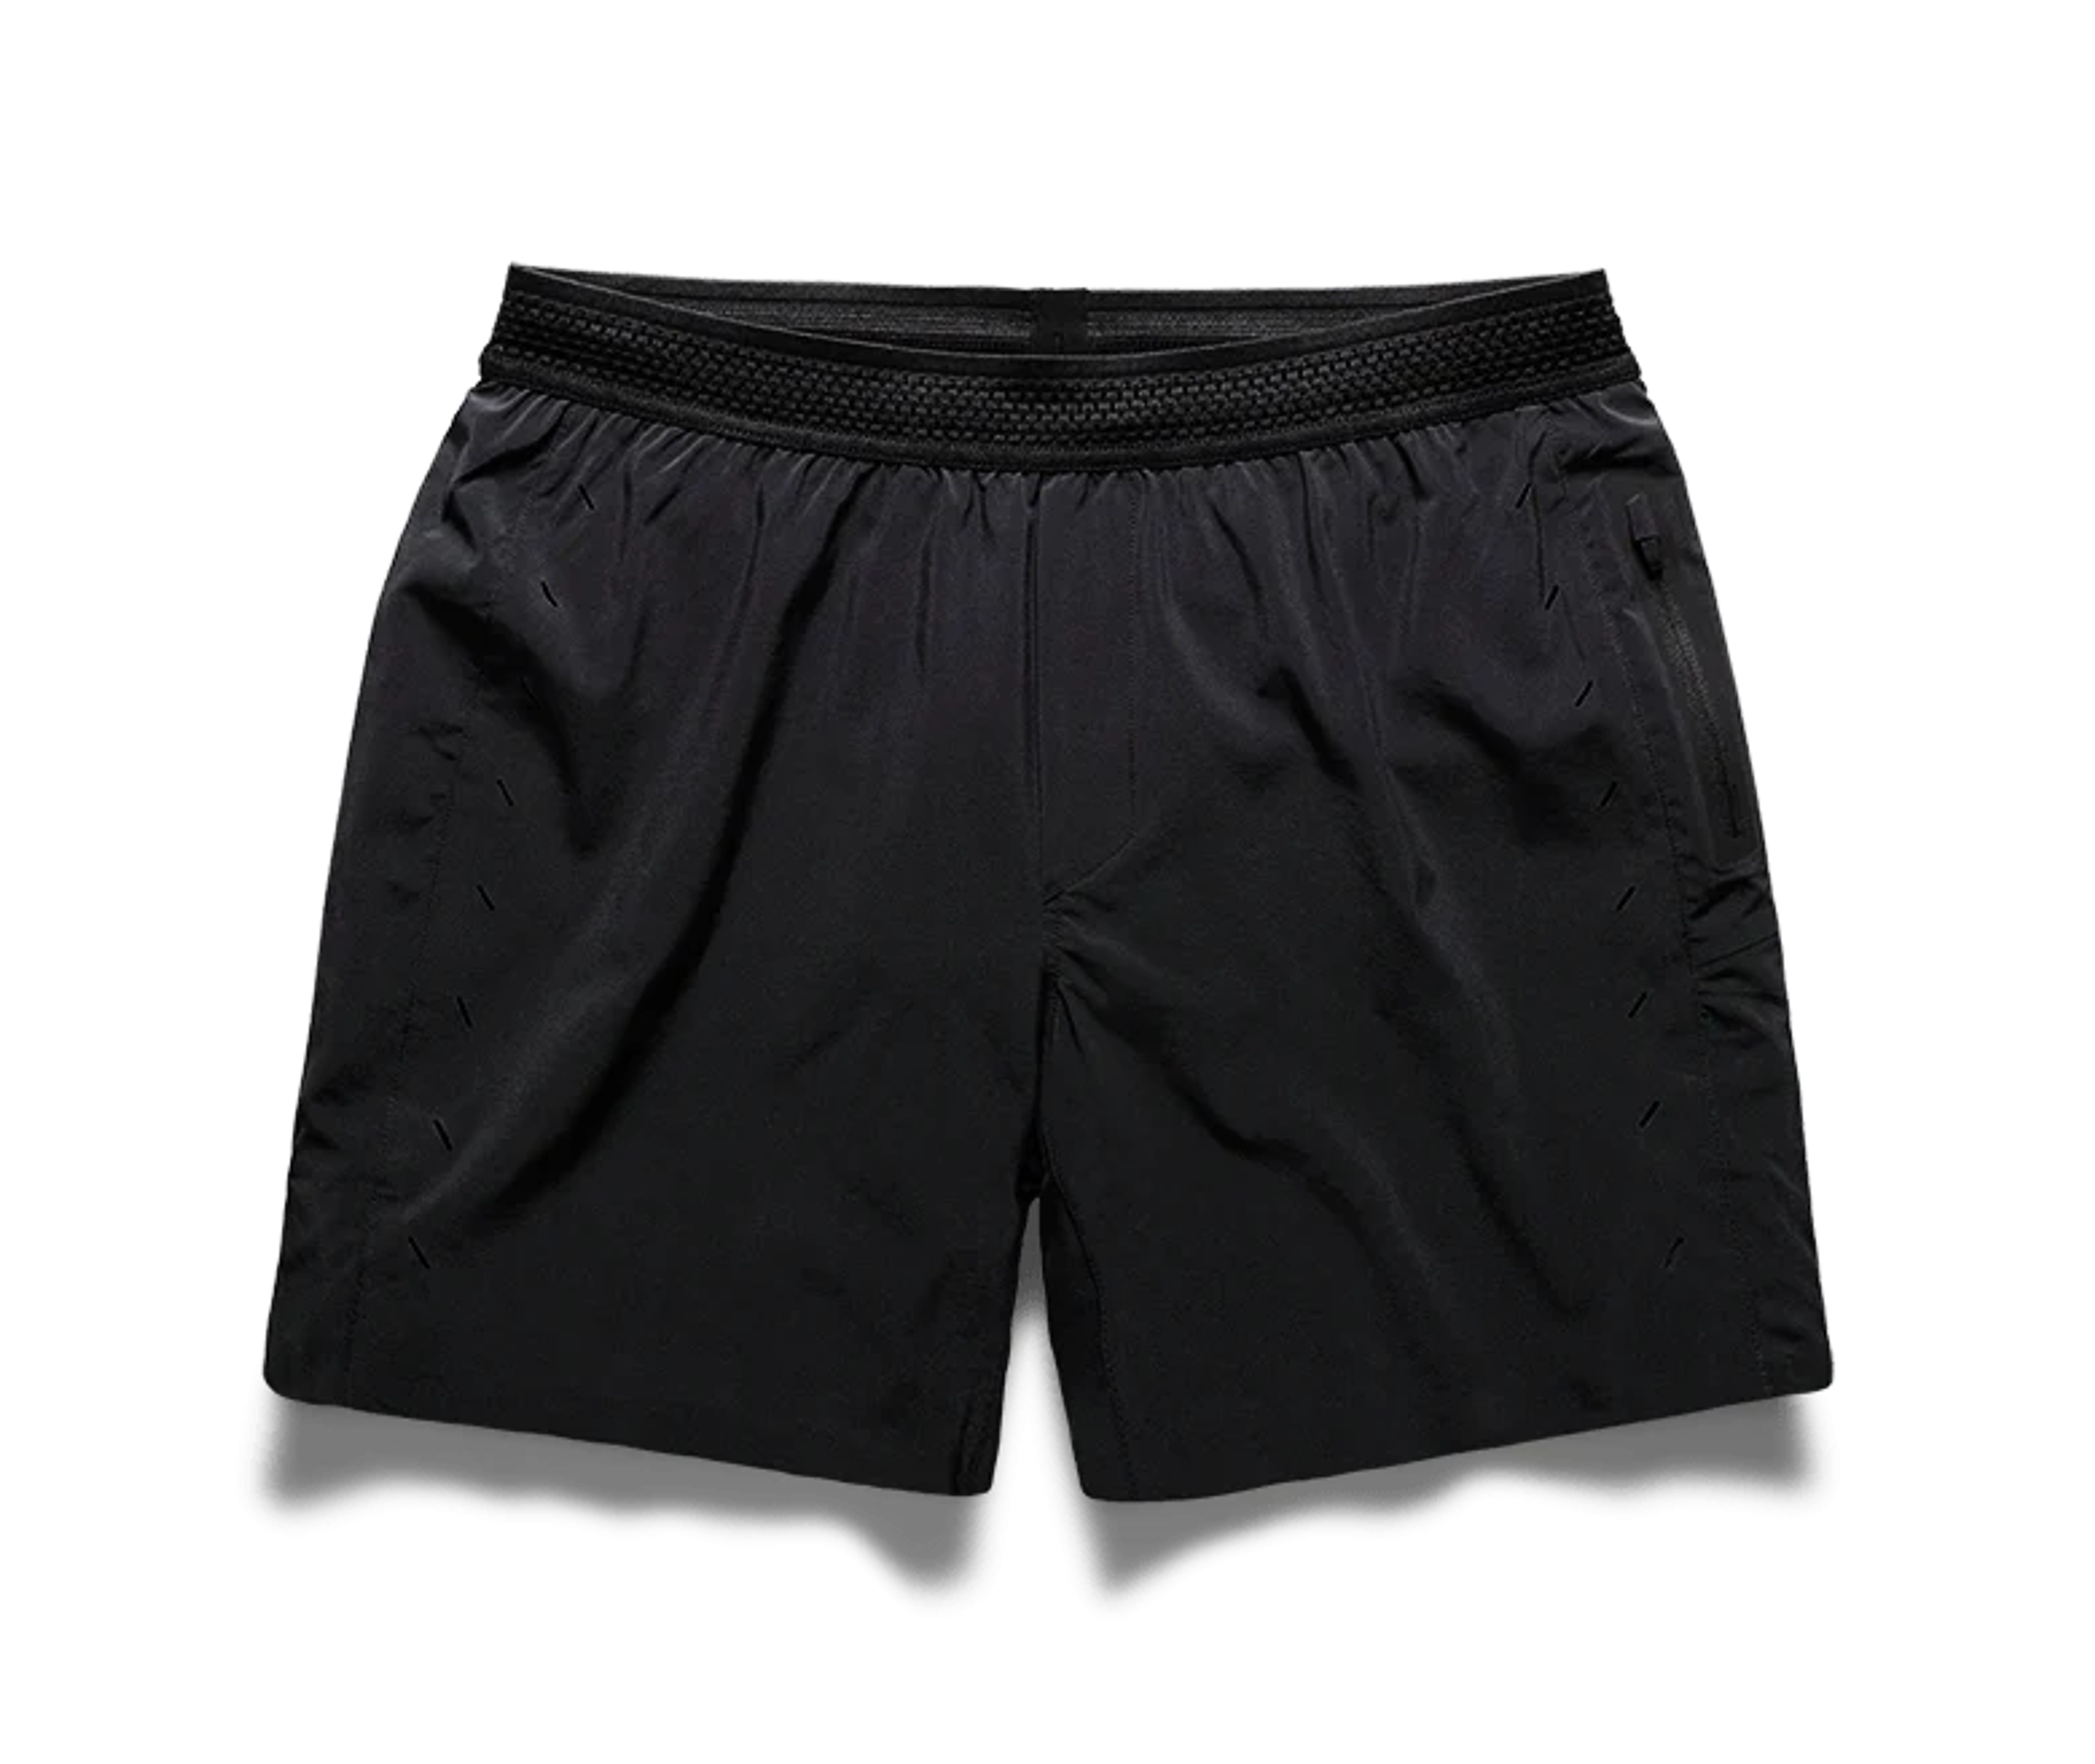 Session Short (Liner) - Black / Small / 5-inch